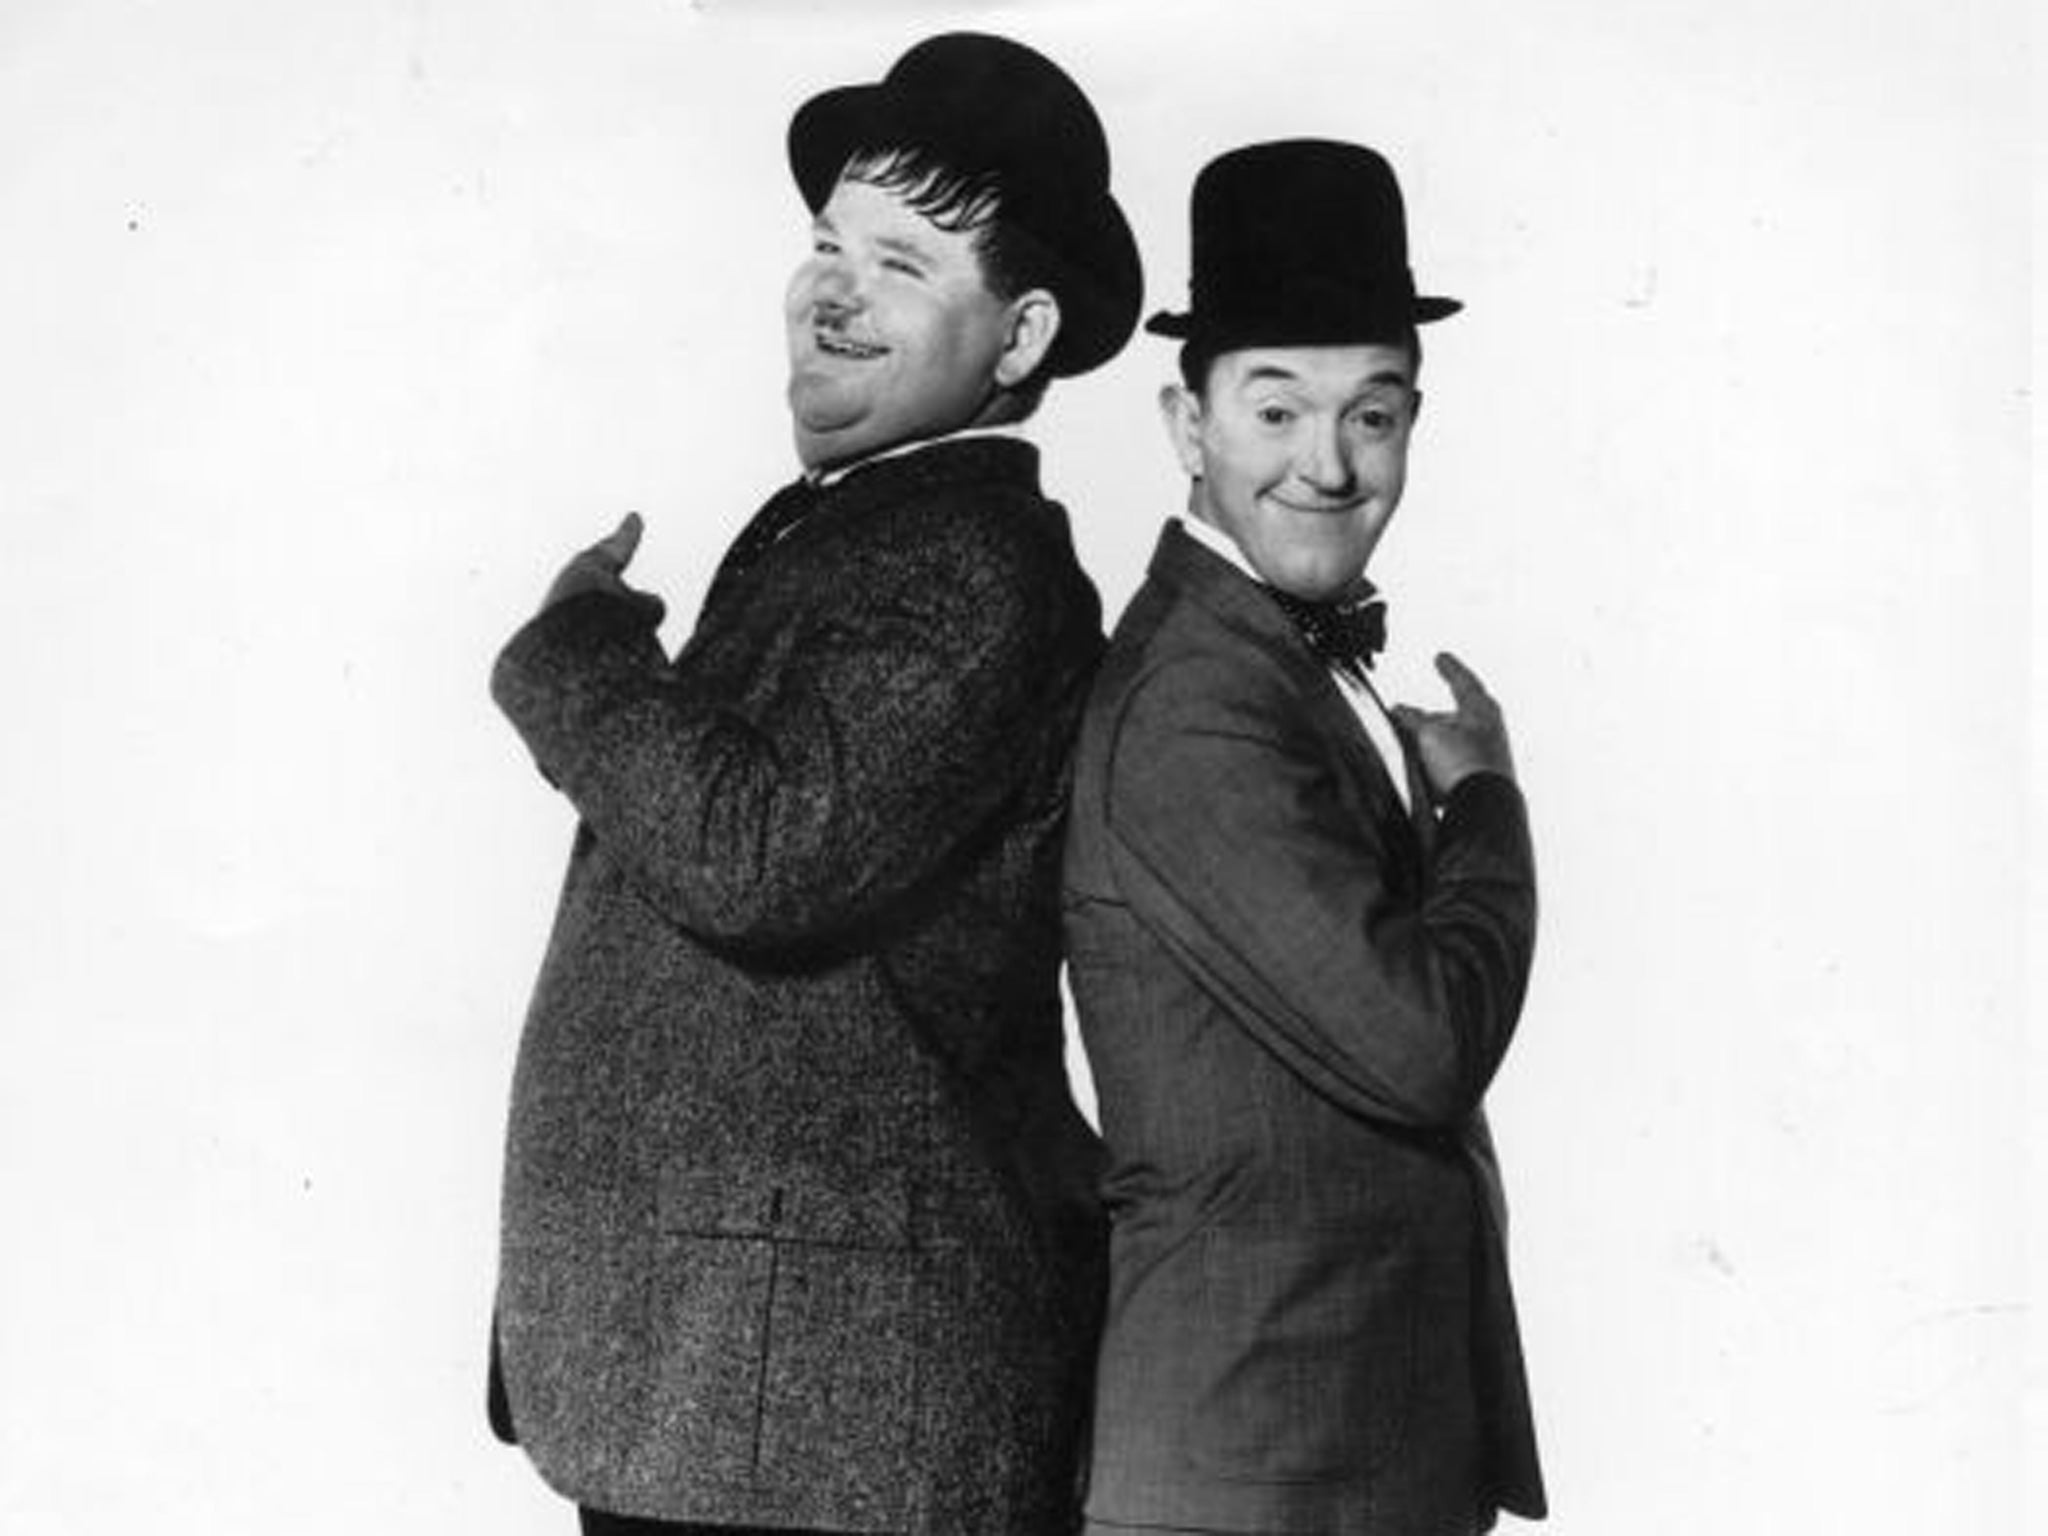 Larger than life: Laurel and Hardy played up to the classic thin man/fat man dualism in a comedy double act